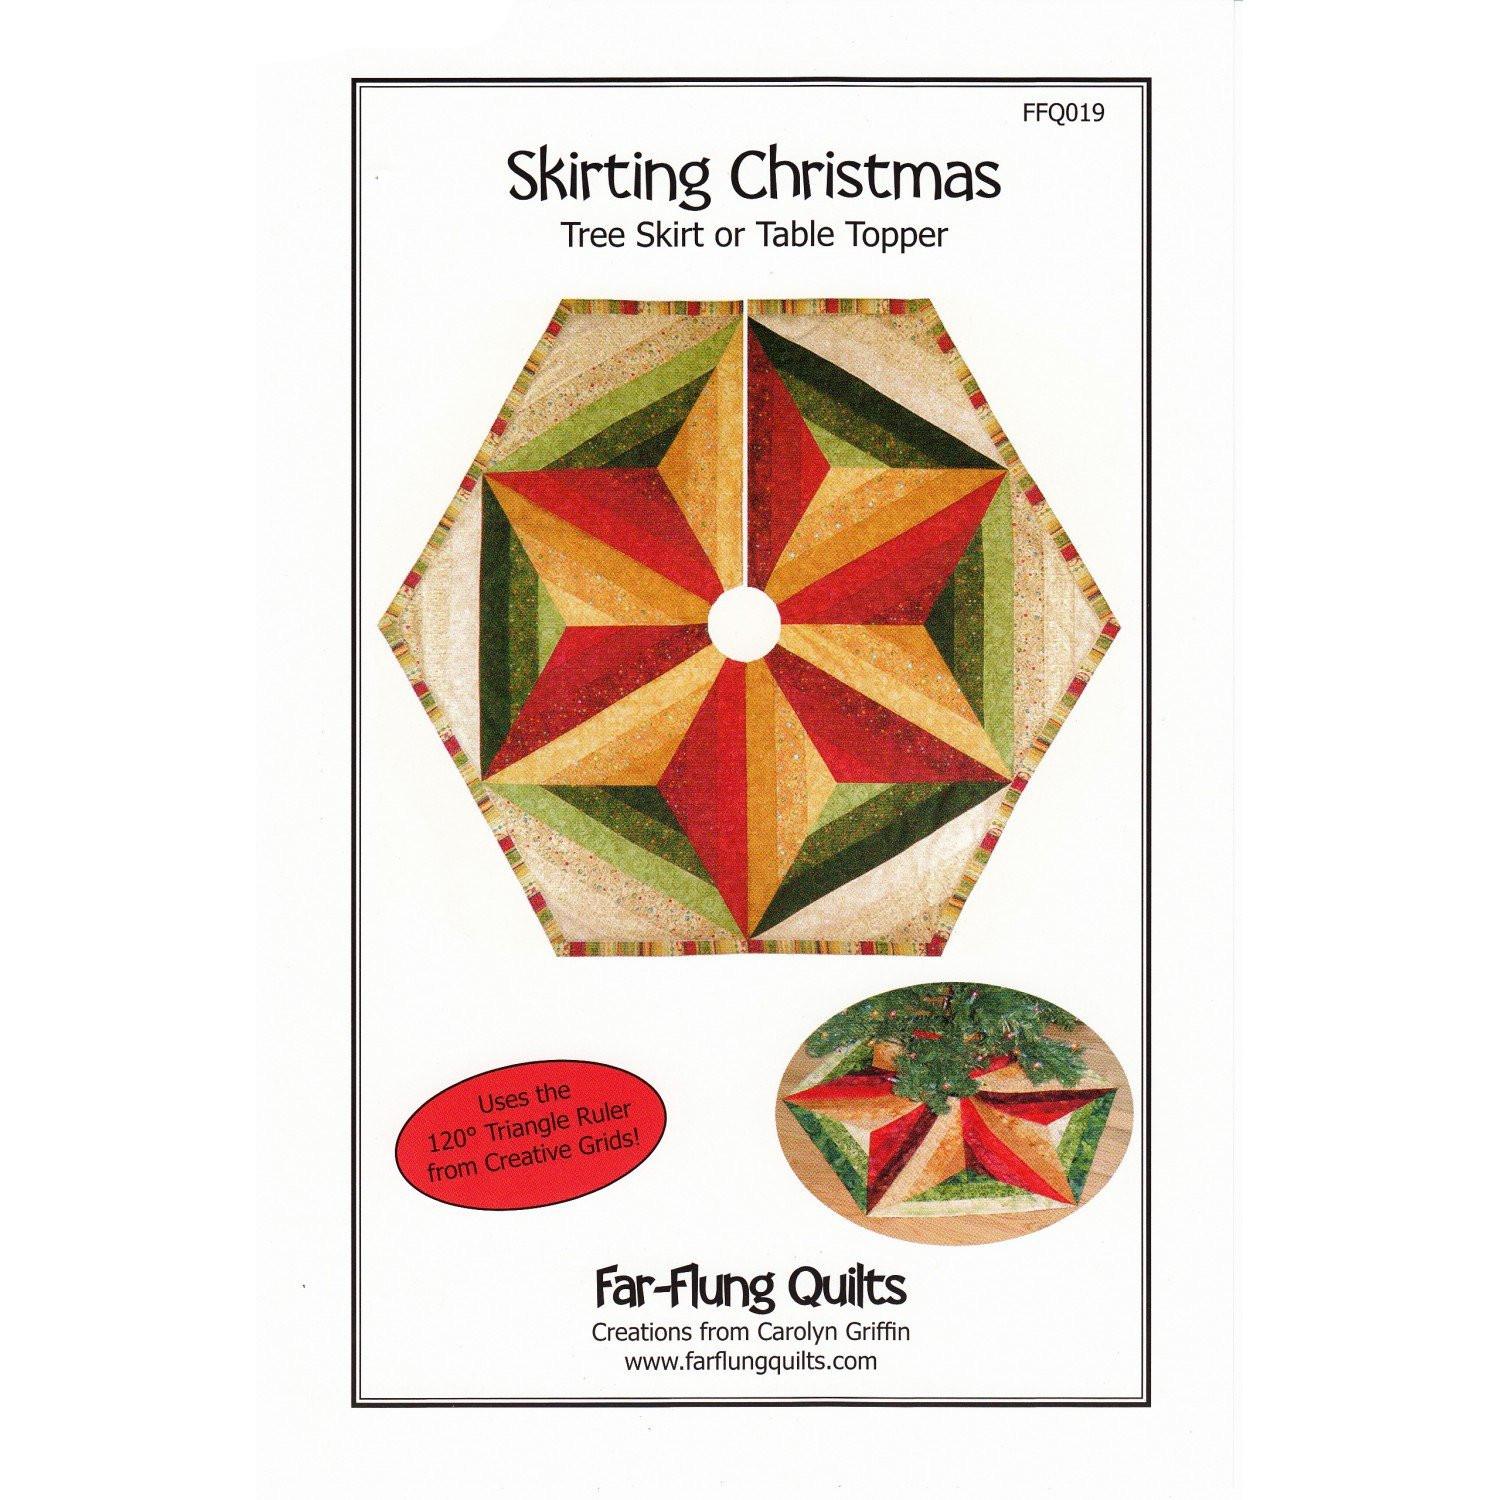 Skirting Christmas Pattern, Far-Flung Quilts image # 60439